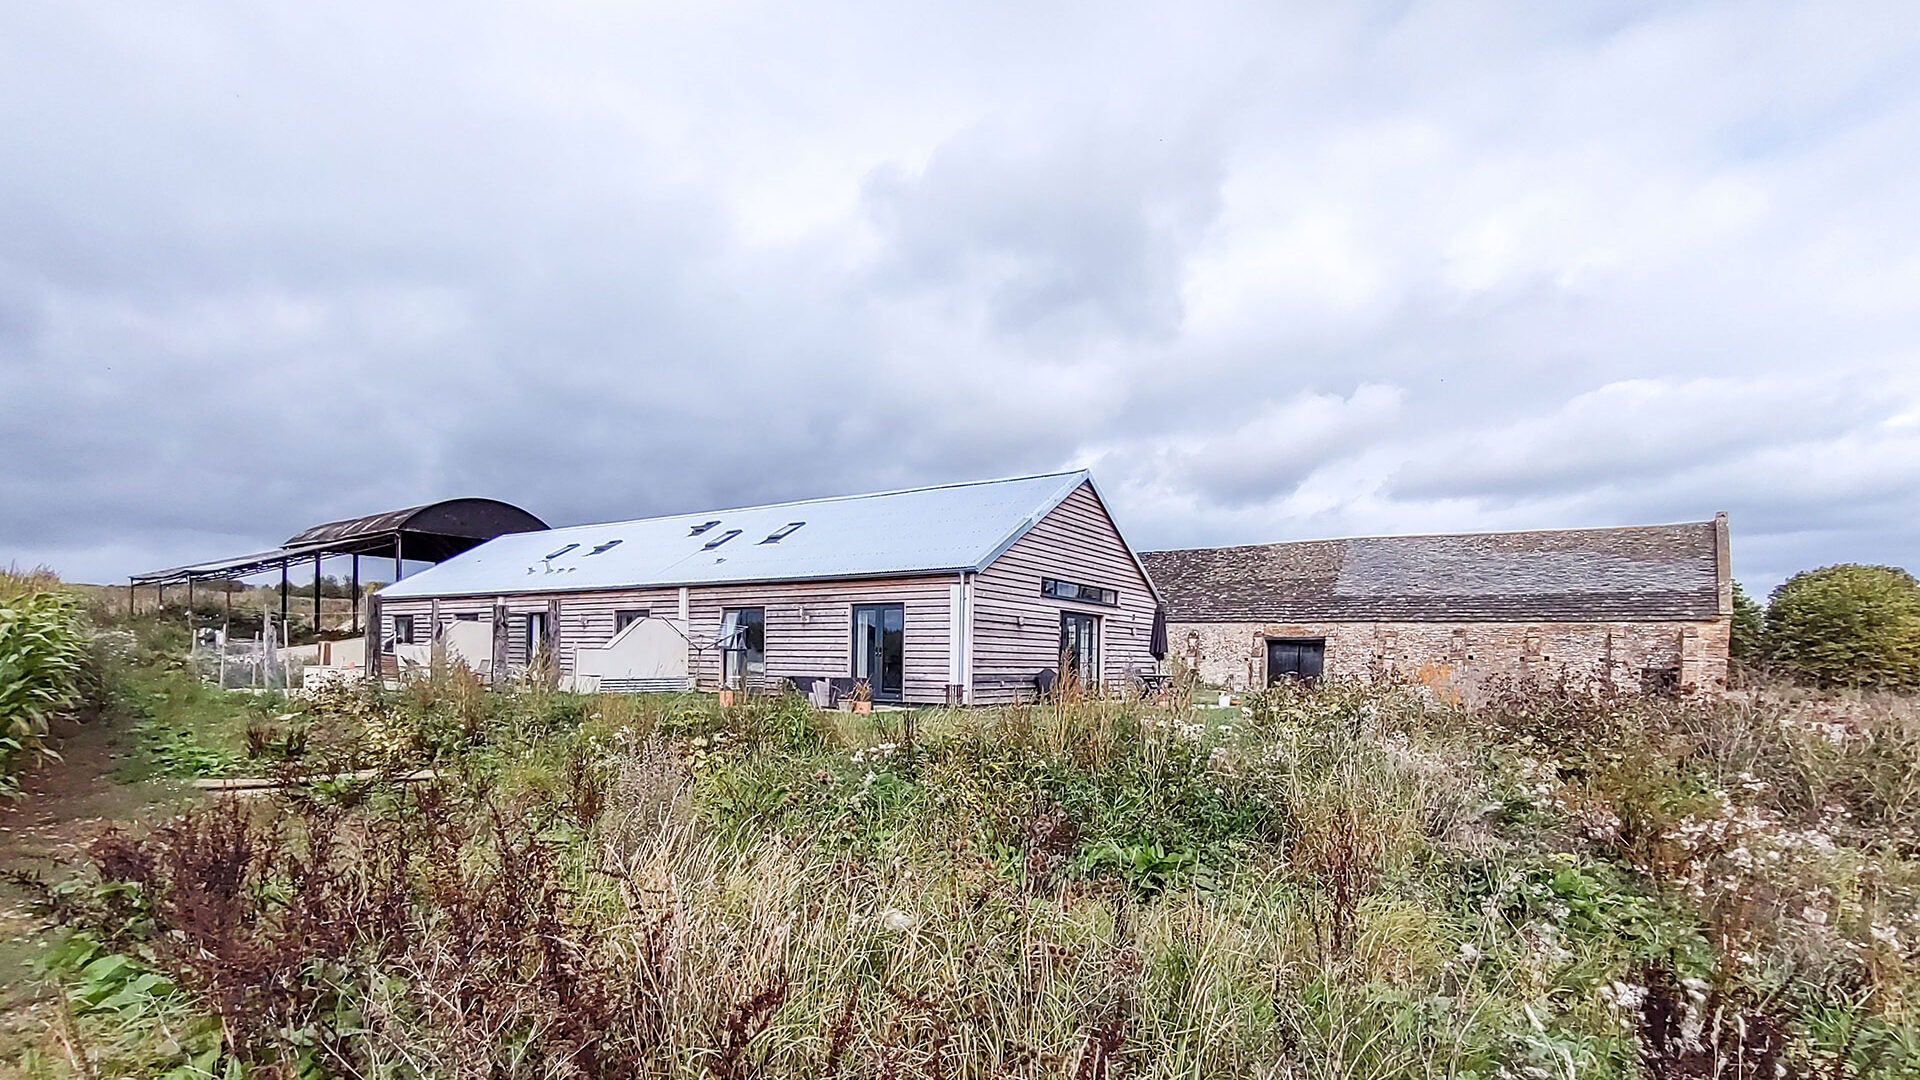 Class Q Converted barn into housing in farm location